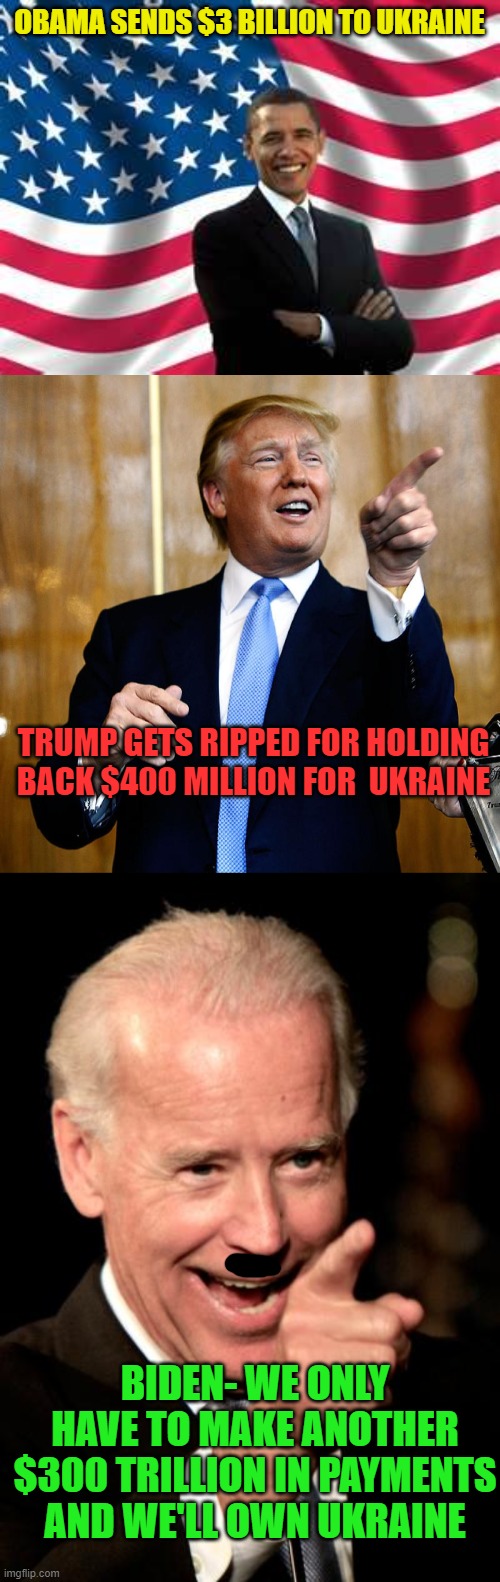 Sooner or later we're going to get what we pay for... | OBAMA SENDS $3 BILLION TO UKRAINE; TRUMP GETS RIPPED FOR HOLDING BACK $400 MILLION FOR  UKRAINE; BIDEN- WE ONLY HAVE TO MAKE ANOTHER $300 TRILLION IN PAYMENTS AND WE'LL OWN UKRAINE | image tagged in memes,obama,donal trump birthday,smilin biden | made w/ Imgflip meme maker